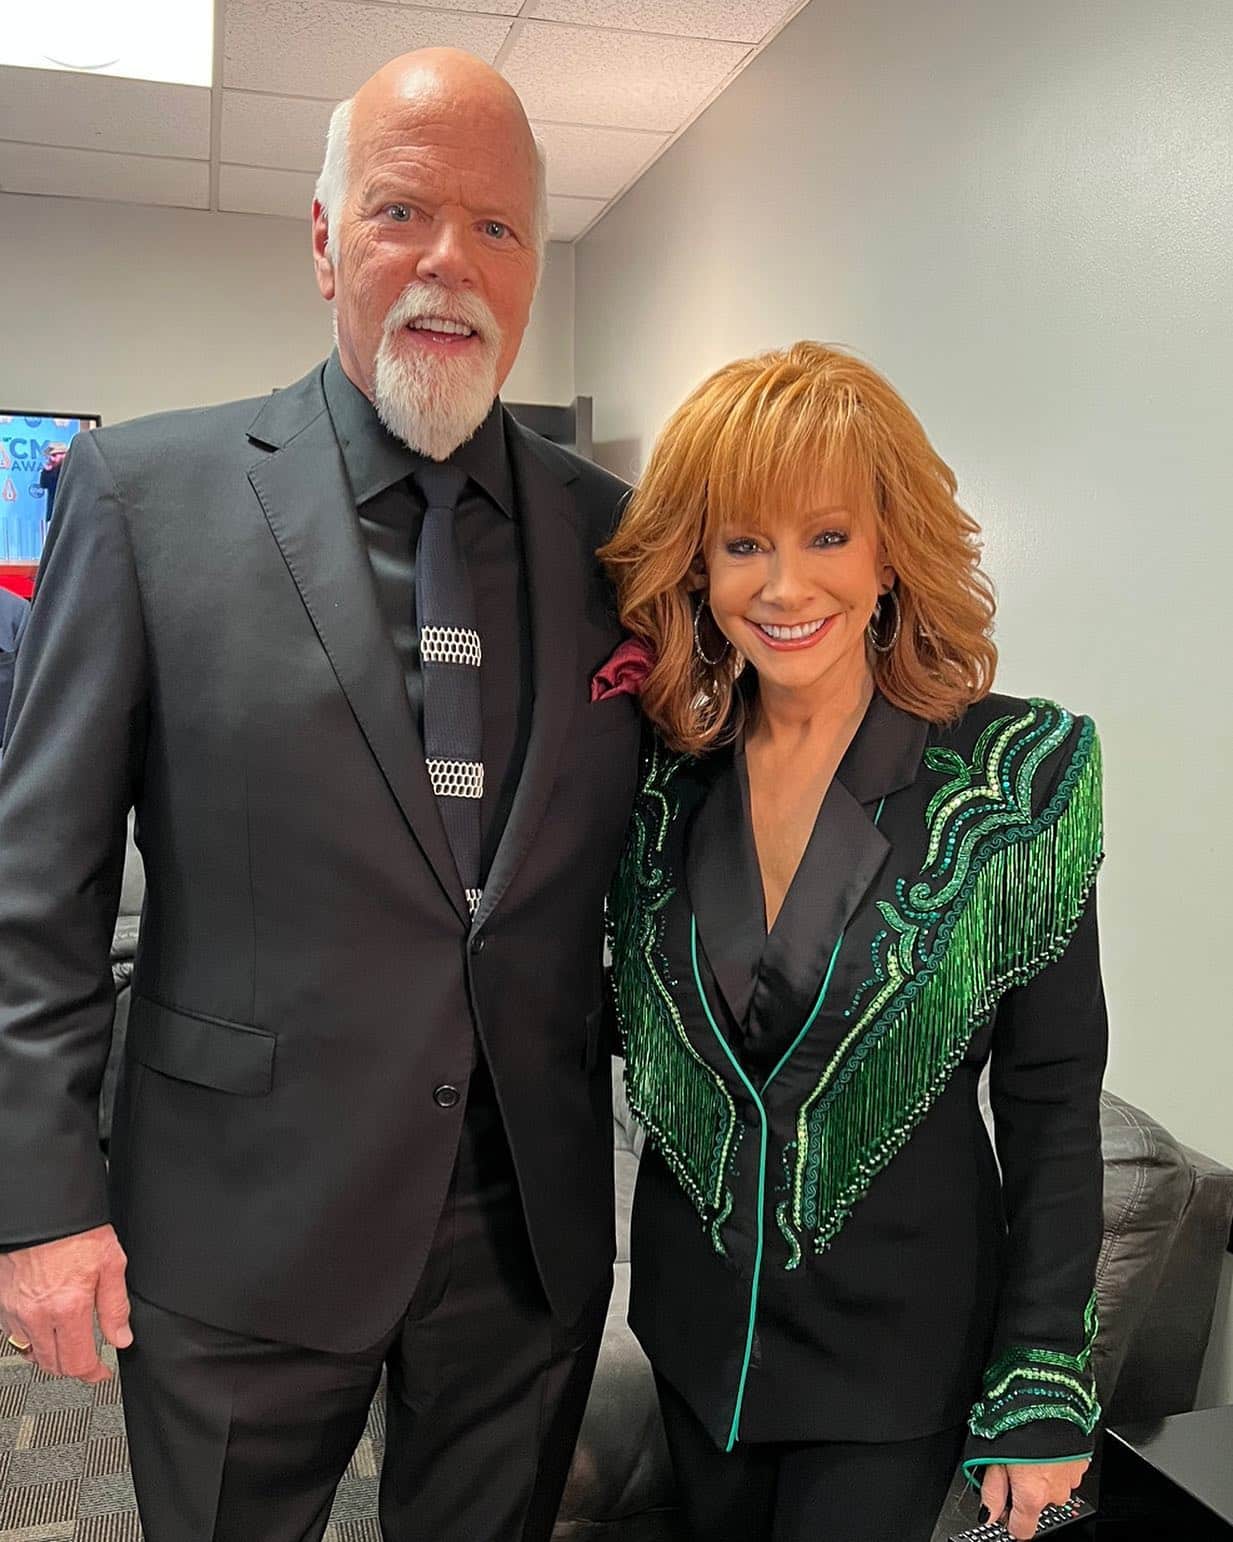 Reba McEntire questioned why she didn't fall in love with her boyfriend, Rex Linn, earlier in life. Here, they're photographed backstage together at an event.